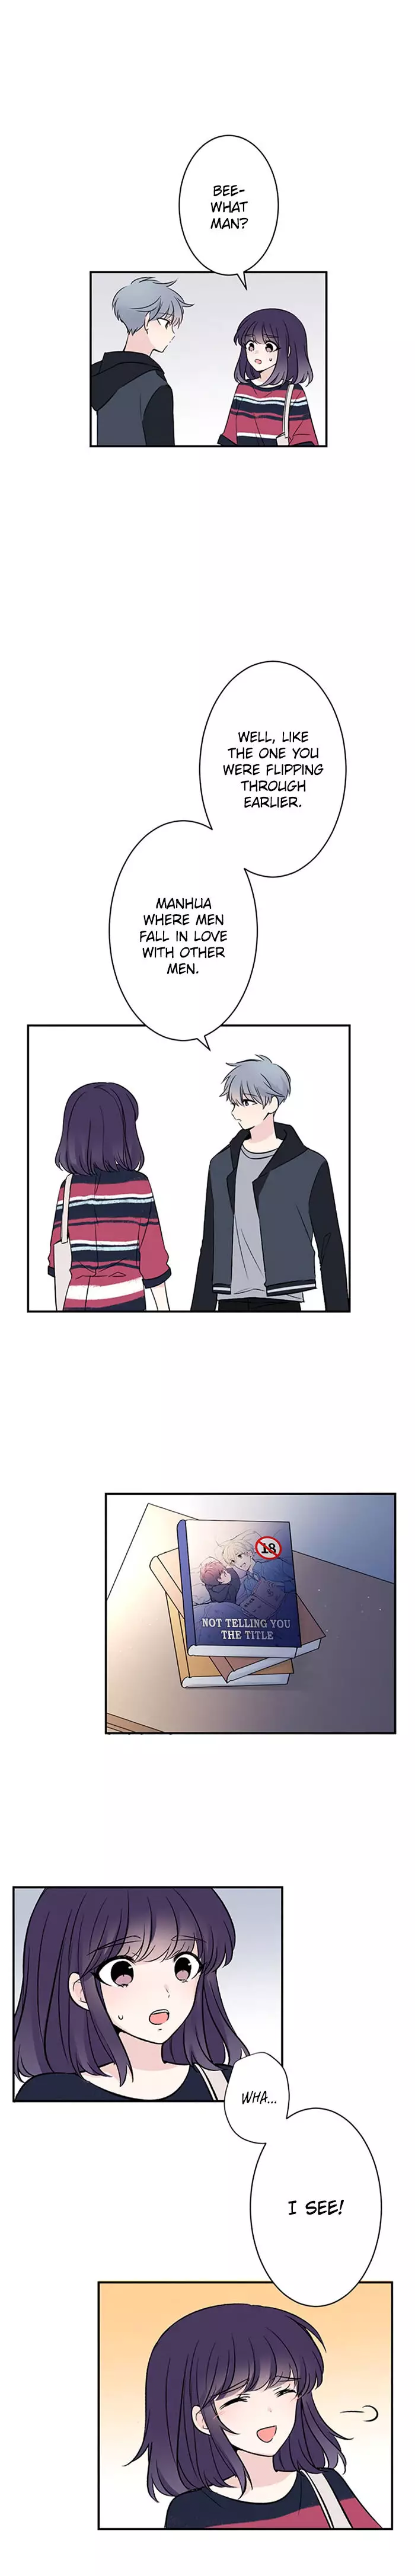 Reversed Love Route - 30 page 10-fdbdd56c